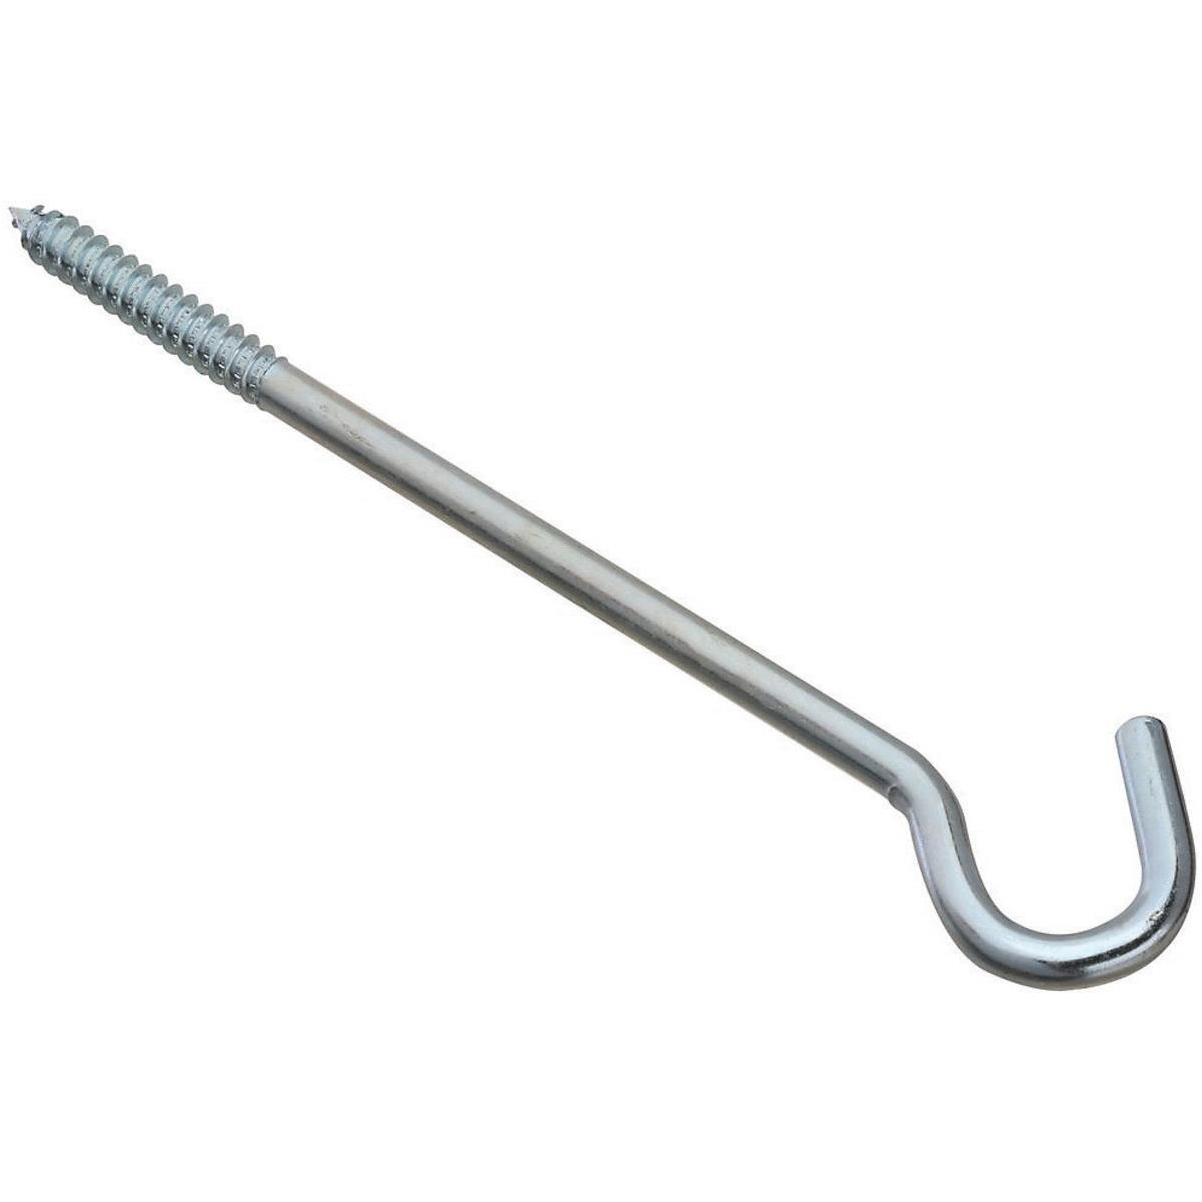  Lag Screw Hook, Zinc Plated, 0.5 Inch x 6 Inches  (Right-Threaded) : Industrial & Scientific